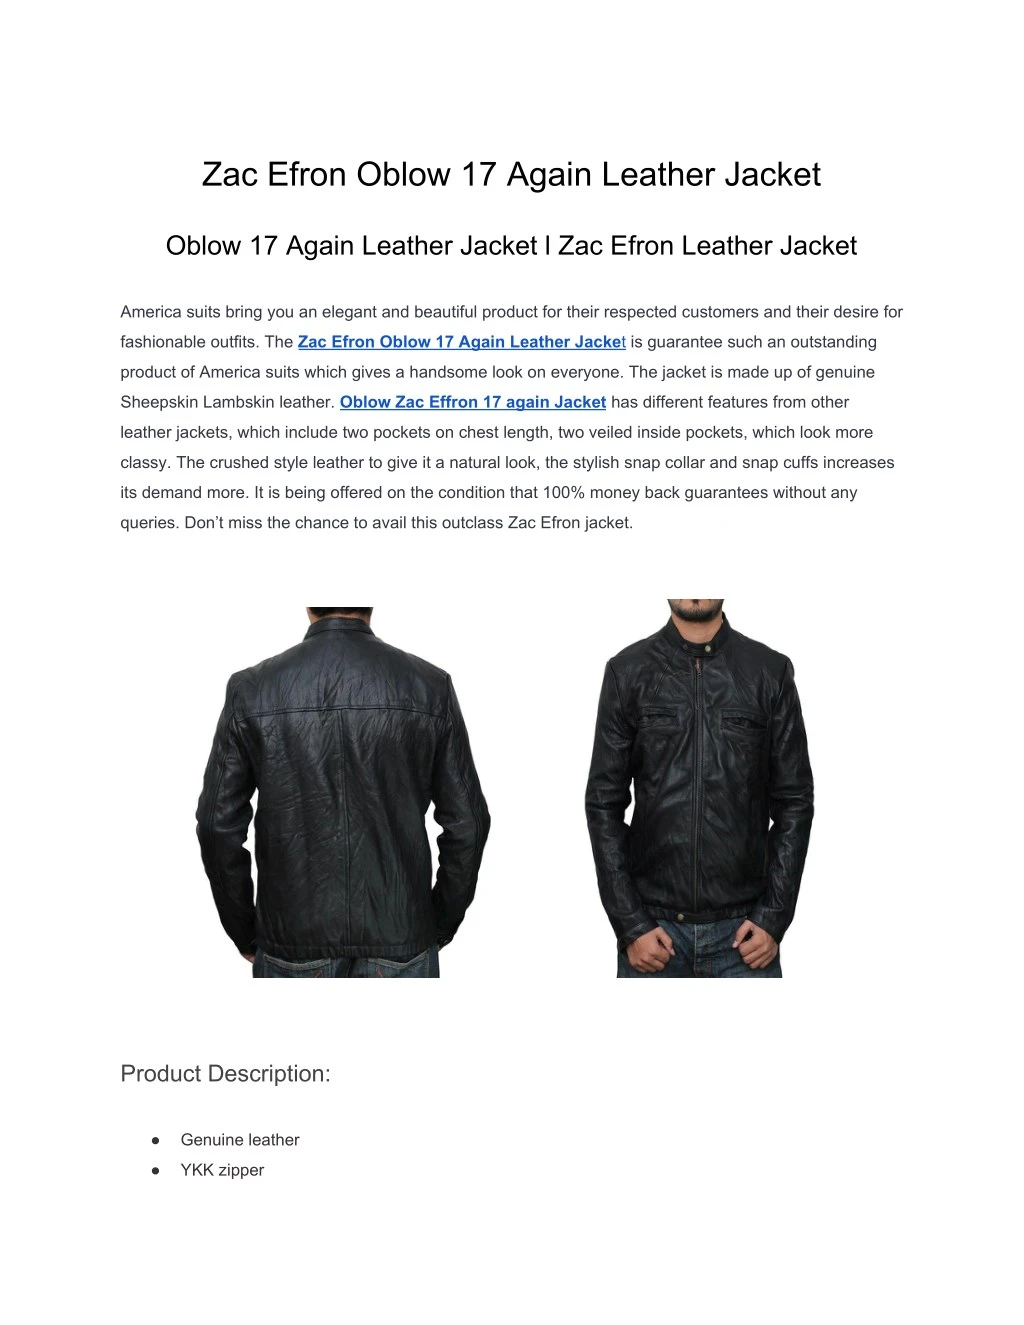 zac efron oblow 17 again leather jacket